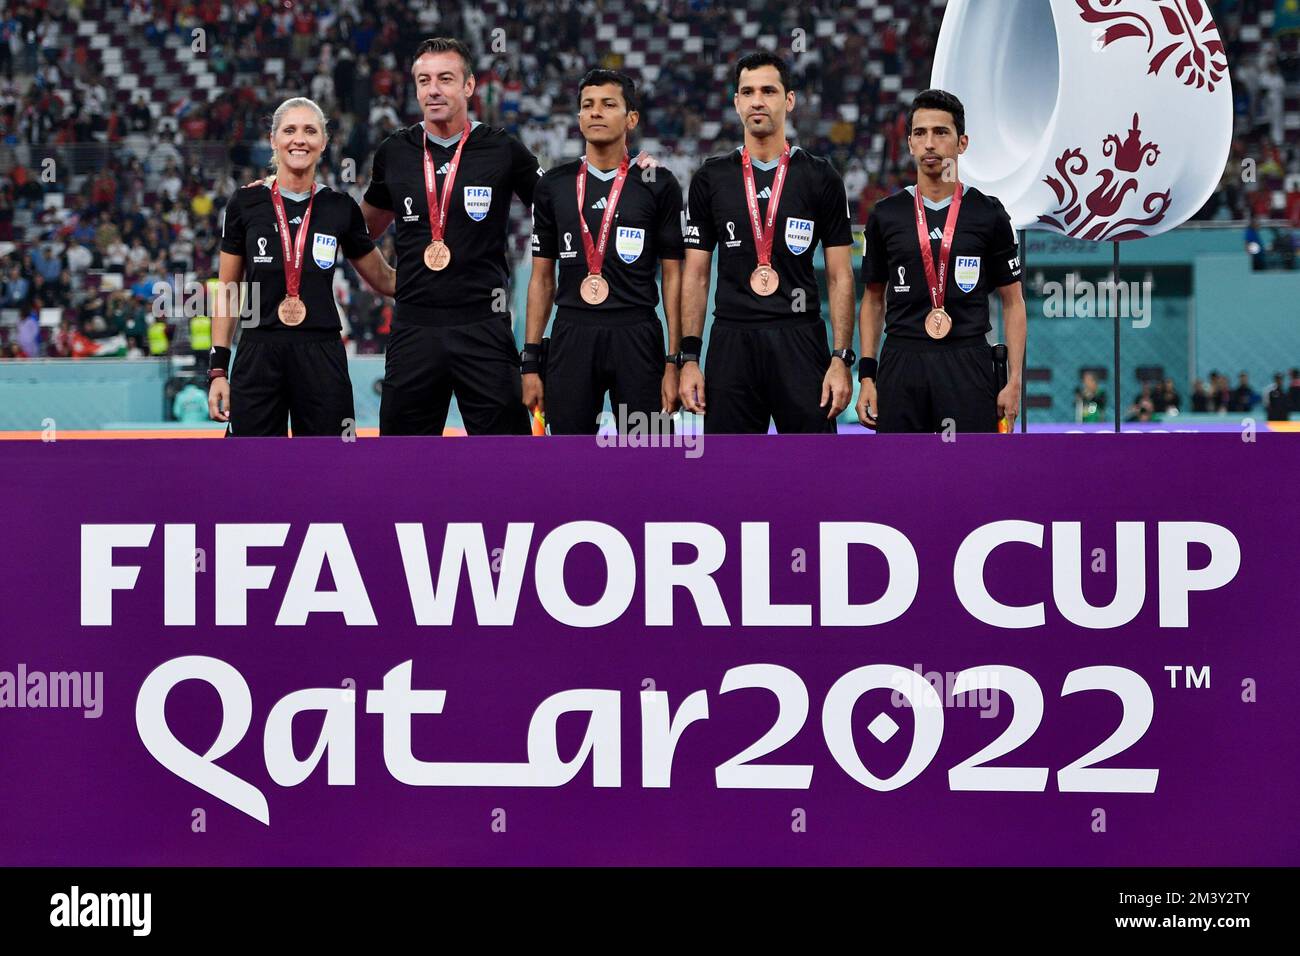 DOHA, QATAR - DECEMBER 17: Referees, including Qatari referee Abdulrahman Al Jassim, pose with medals after the 3rd Place - FIFA World Cup Qatar 2022 match between Croatia and Morocco at the Khalifa International Stadium on December 17, 2022 in Doha, Qatar (Photo by Pablo Morano/BSR Agency) Credit: BSR Agency/Alamy Live News Stock Photo